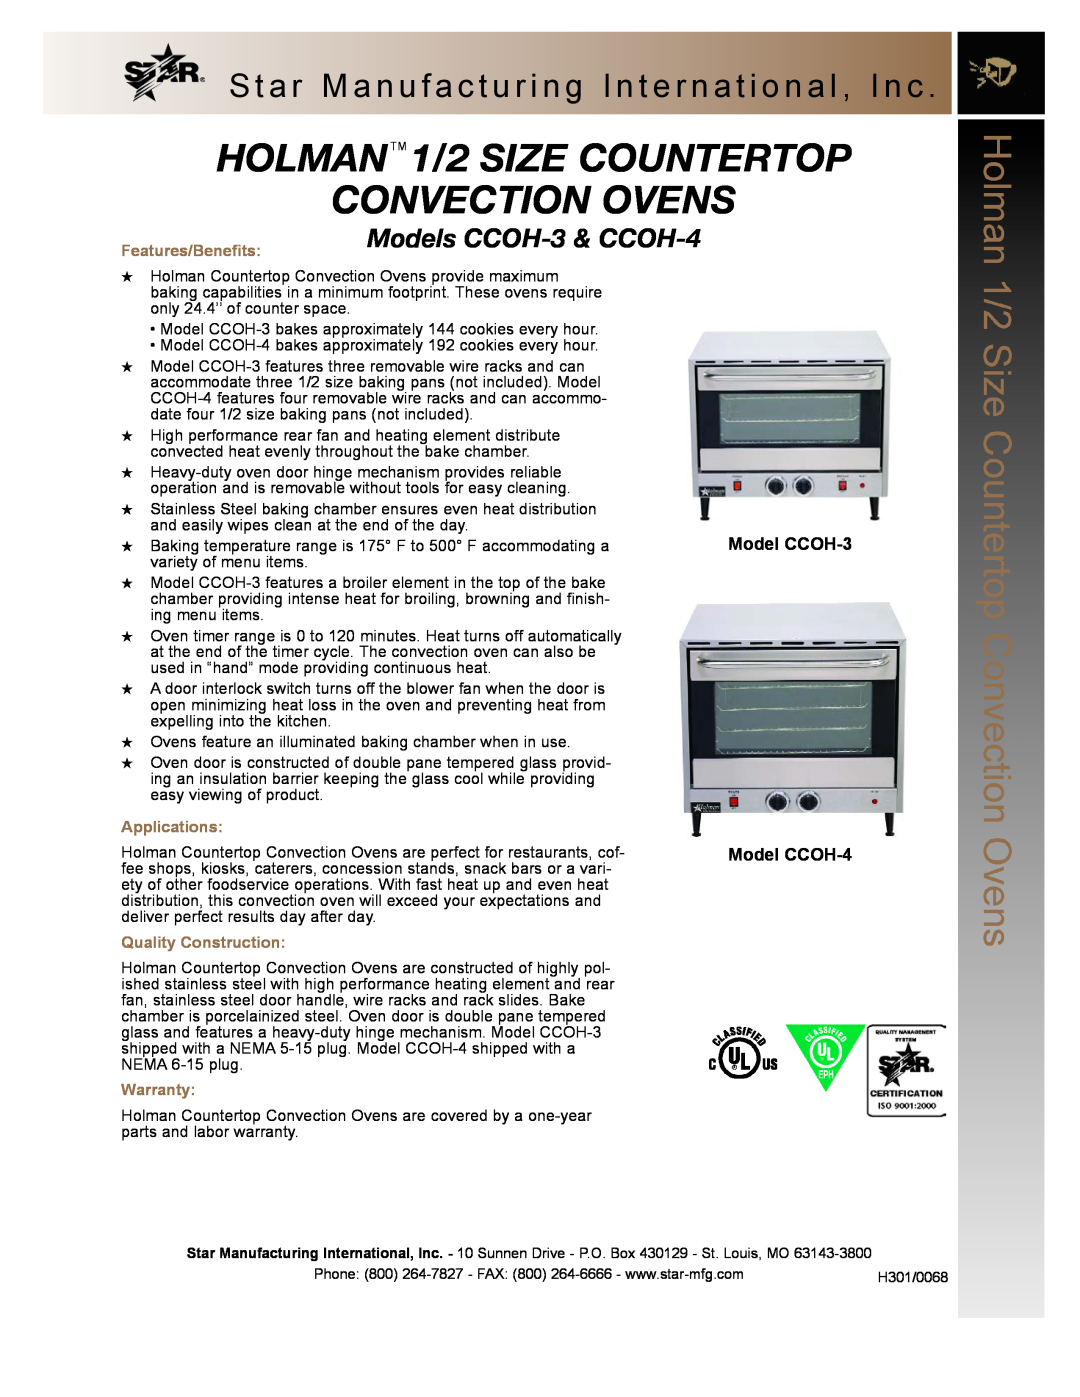 Star Manufacturing warranty HOLMANTM 1/2 SIZE COUNTERTOP CONVECTION OVENS, Models CCOH-3 & CCOH-4, Features/Benefits 